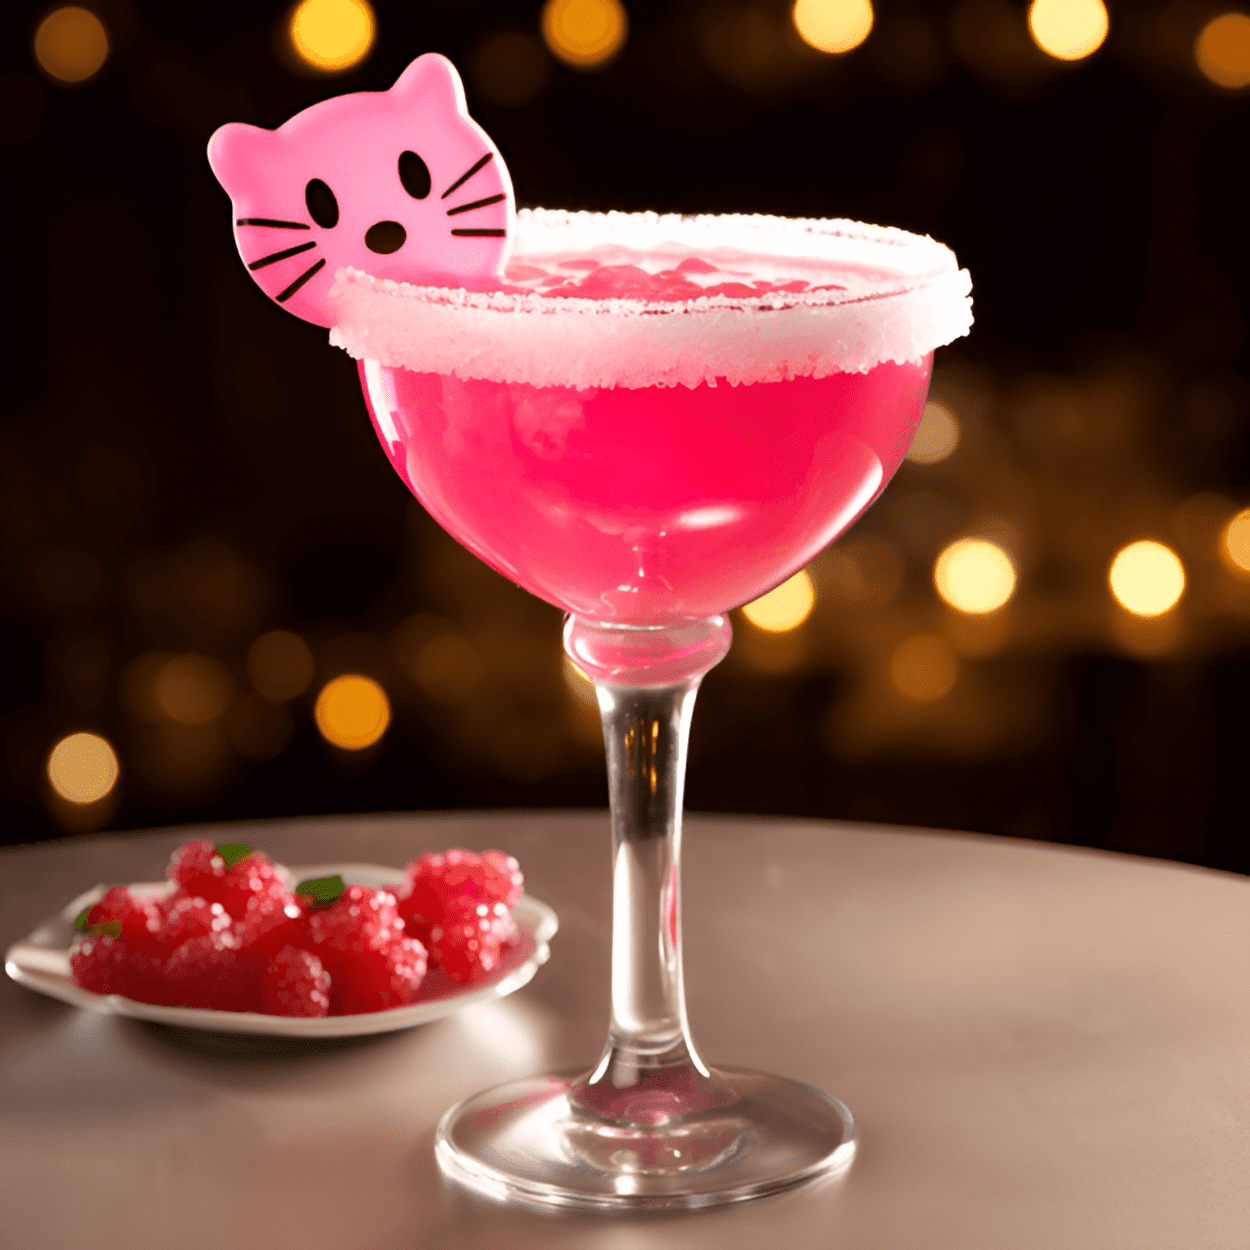 Hello Kitty Cocktail Recipe - The Hello Kitty cocktail is a sweet and fruity delight. It has a refreshing, tangy taste with a hint of tartness from the cranberry juice. The sweetness of the pineapple juice and peach schnapps balance it out perfectly, making it a light and enjoyable drink.